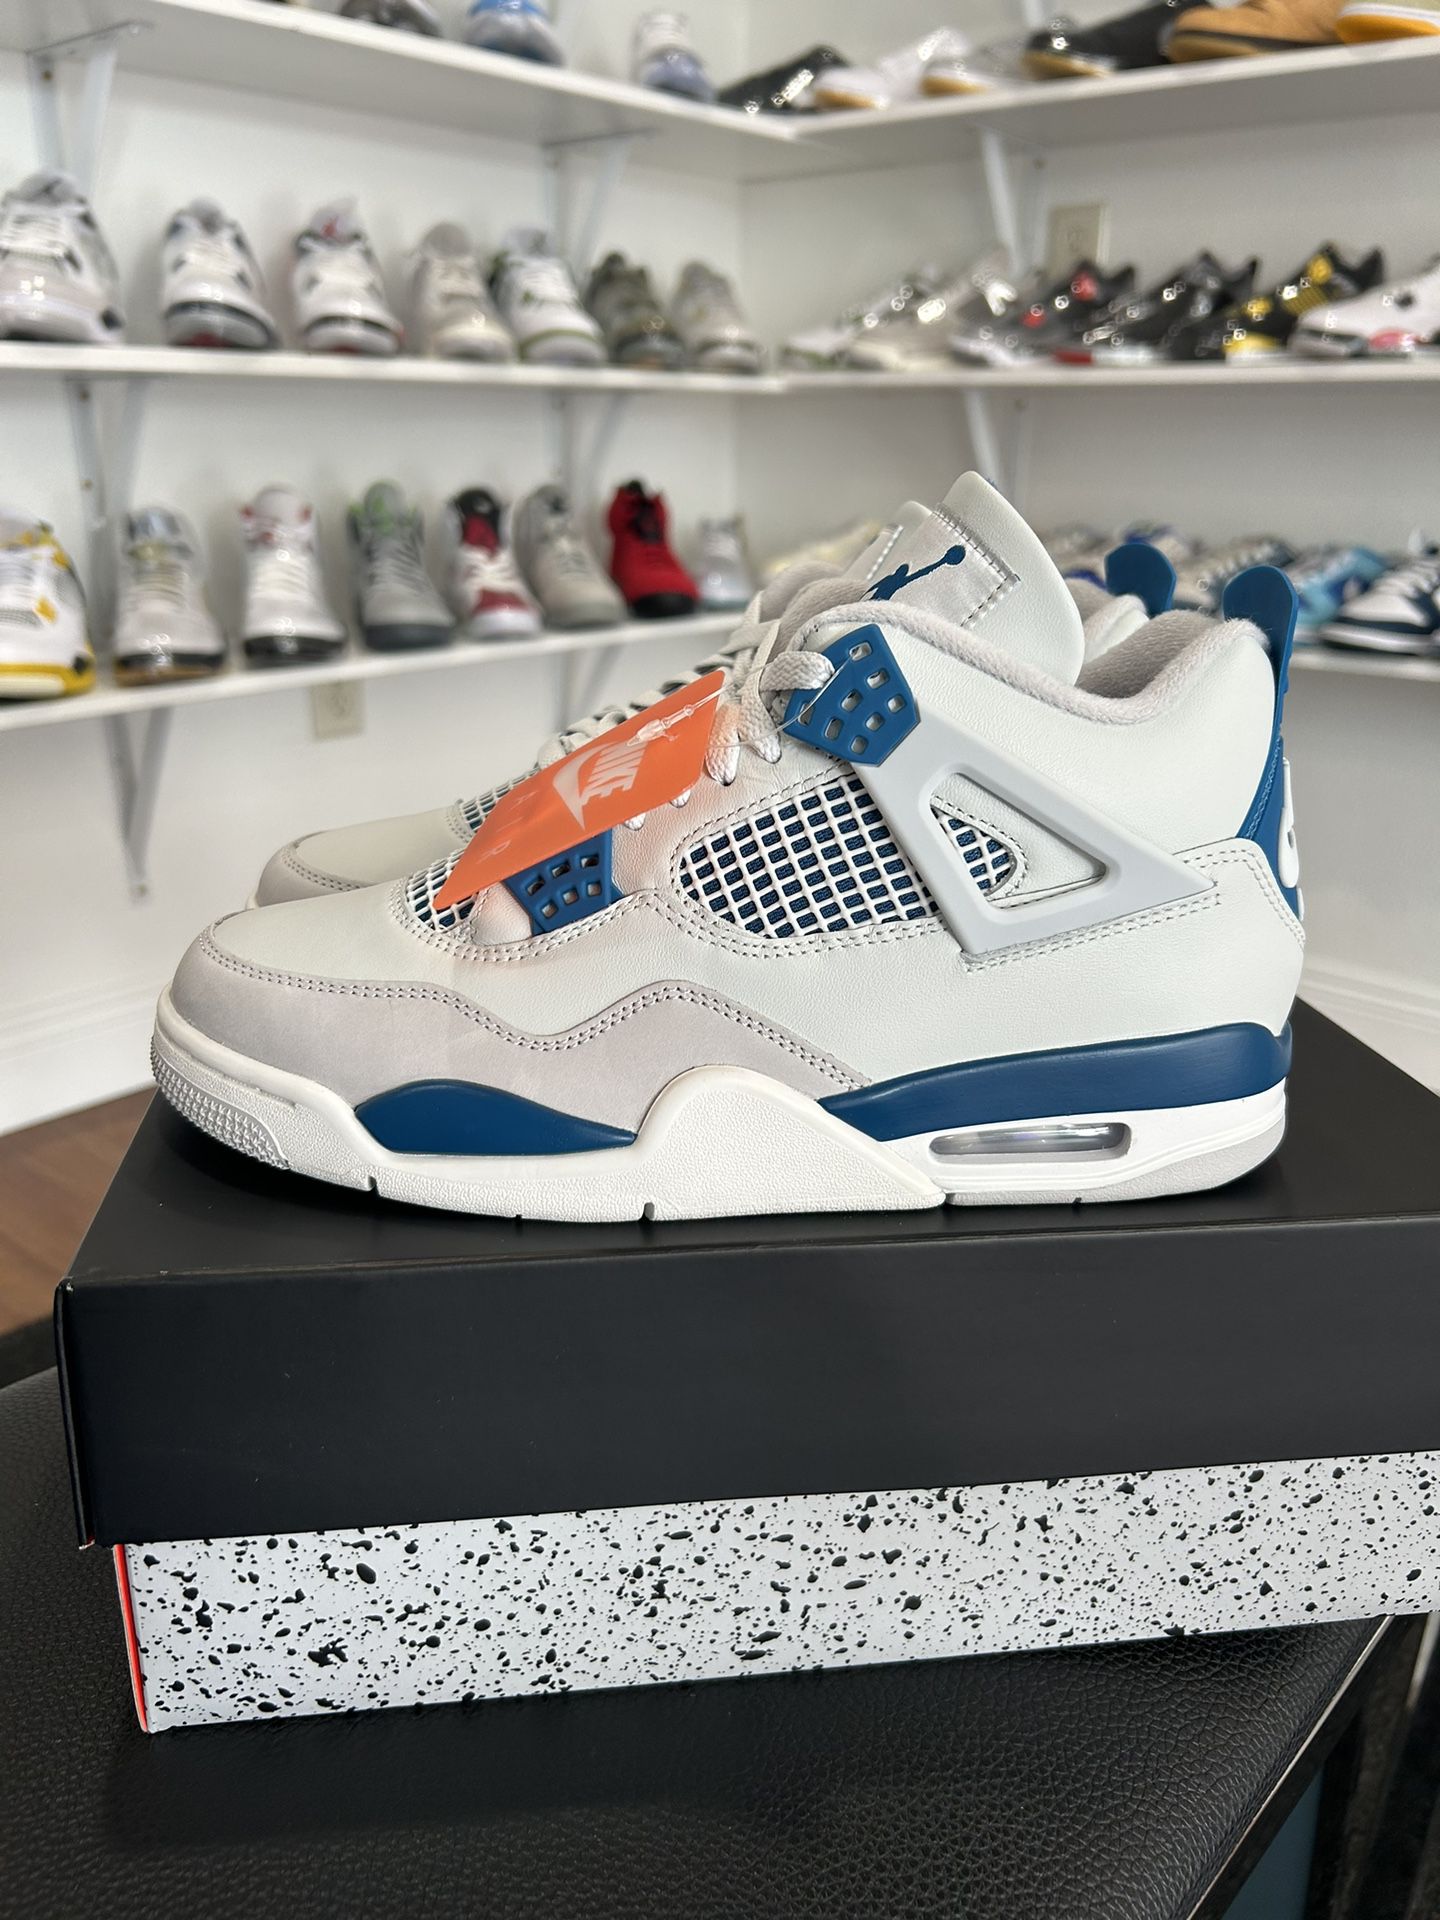 Brand New Jordan 4 Military Blue Couple Sizes Available